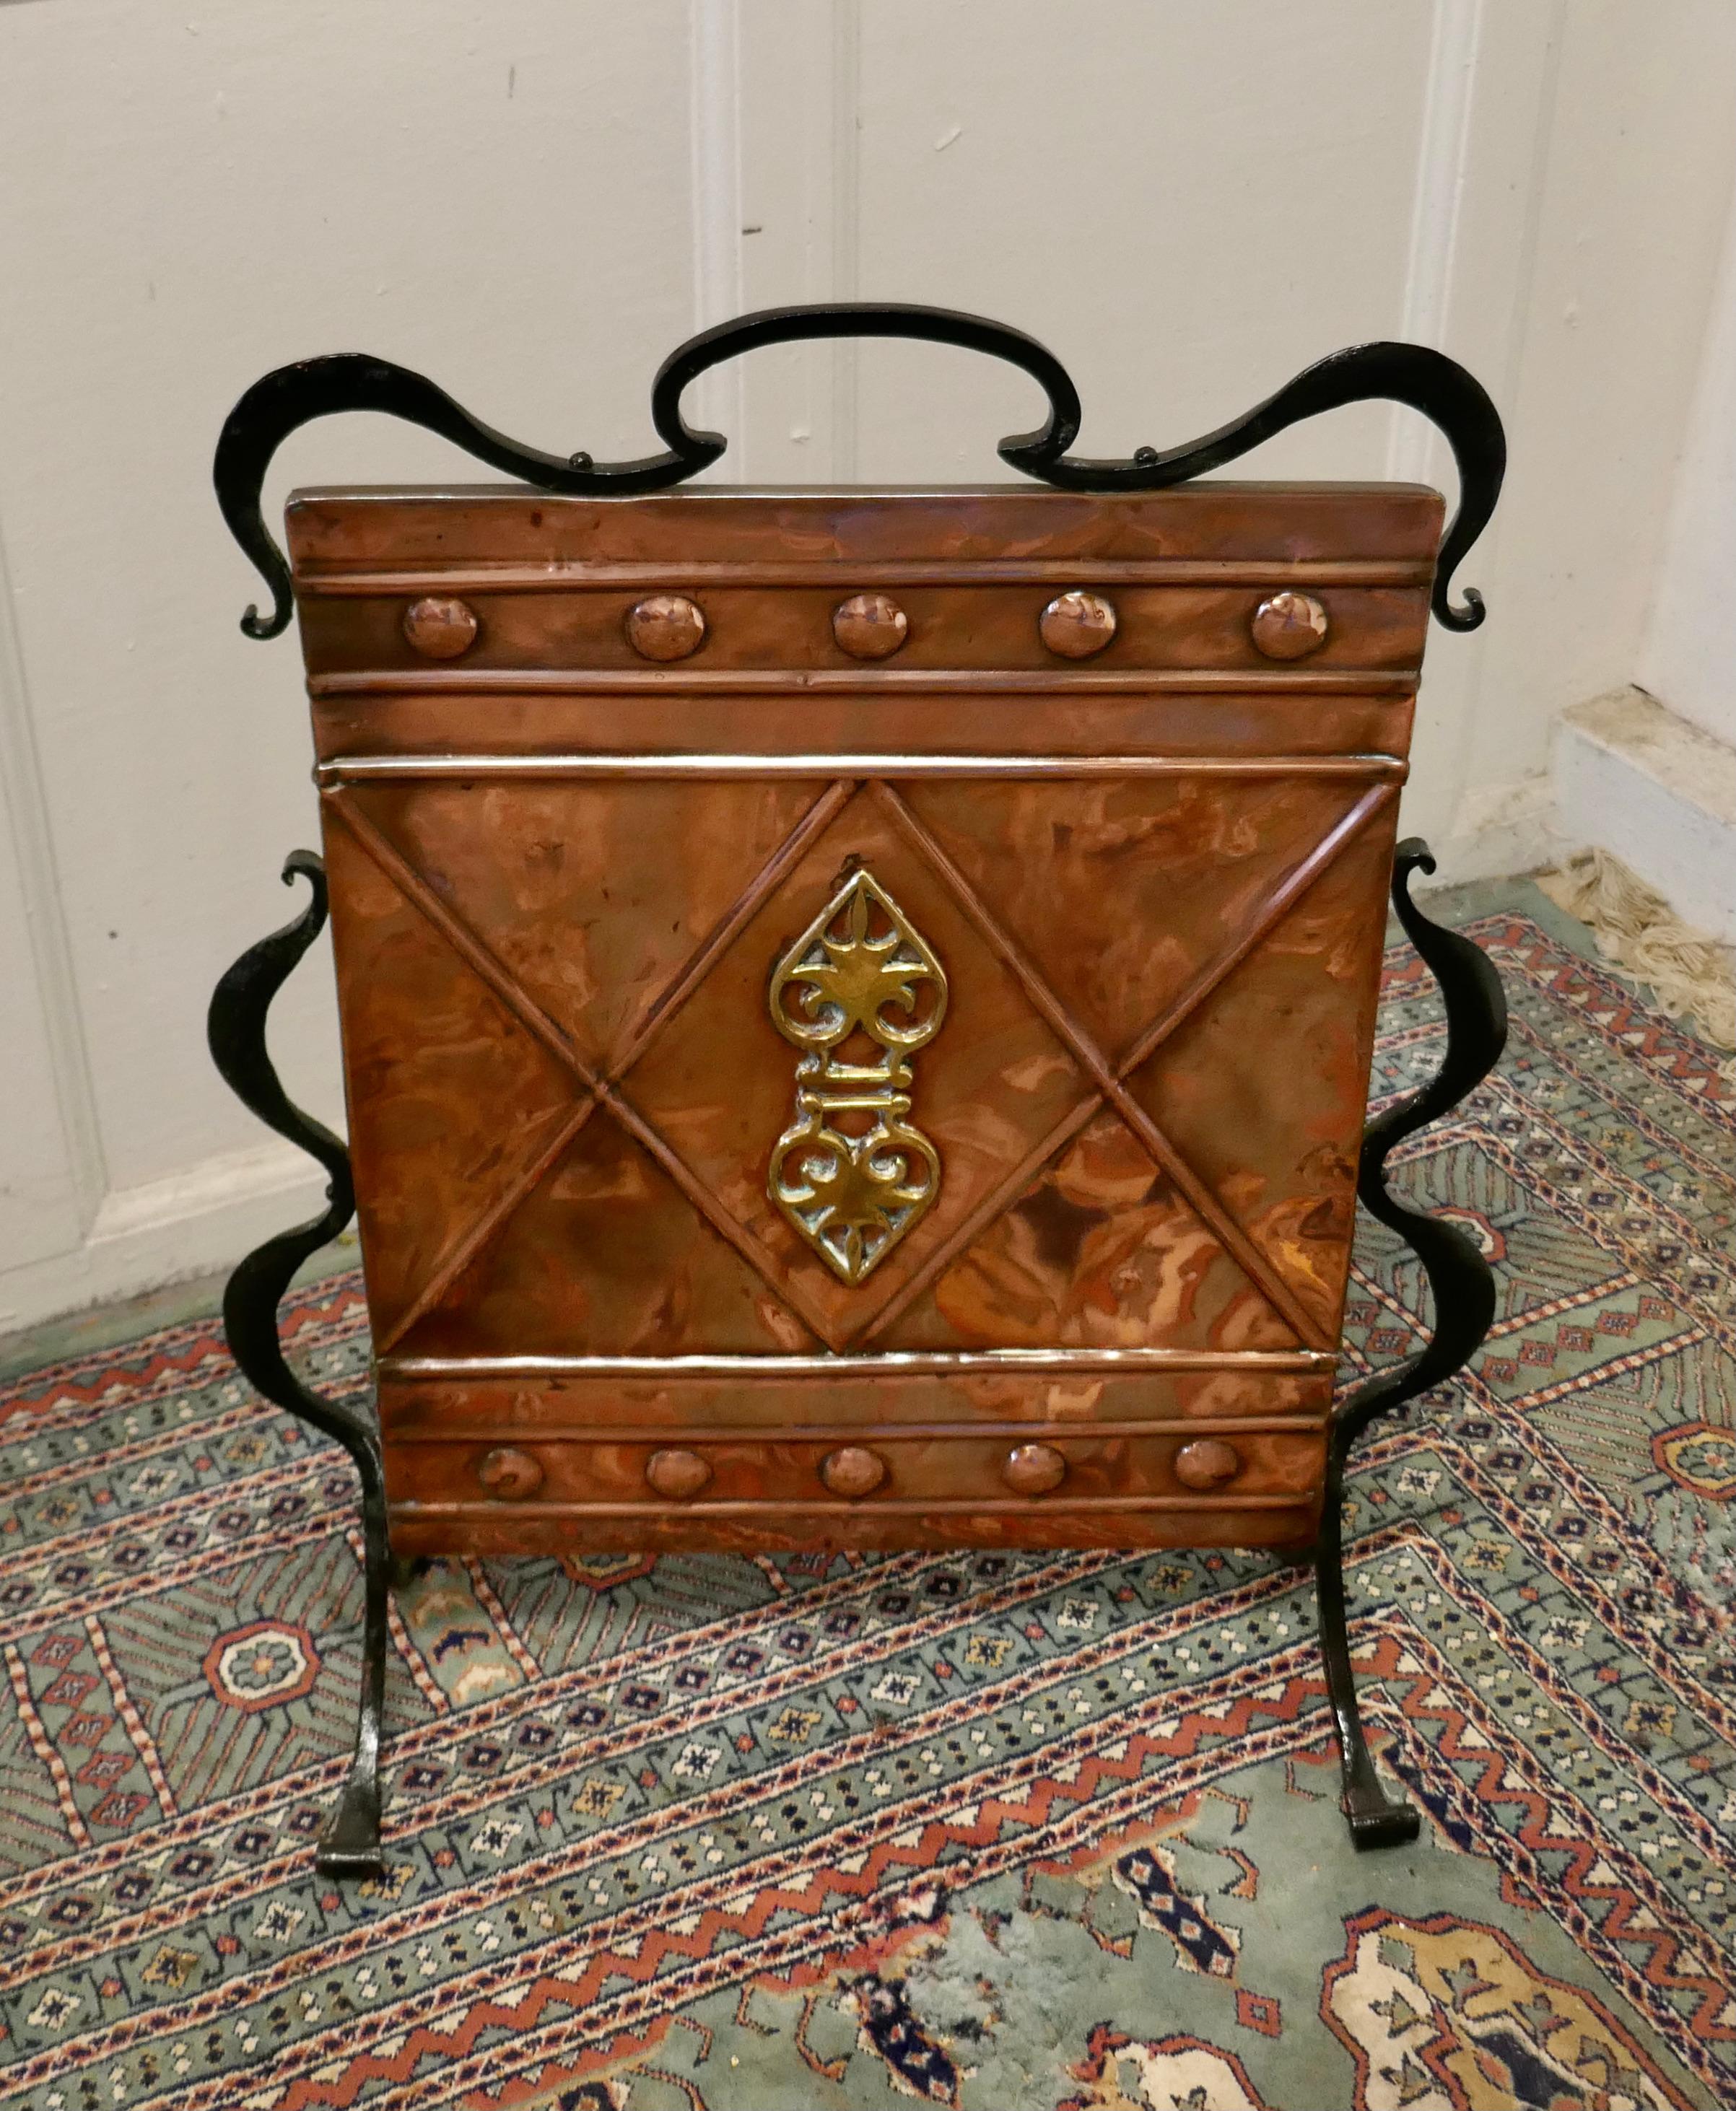 Victorian Arts and Crafts copper and iron fire screen

This is a classic in the Arts and Crafts style, it is a hand beaten copper screen, which is mounted on very stylish wrought Iron feet which carry all the way to the top culminating with